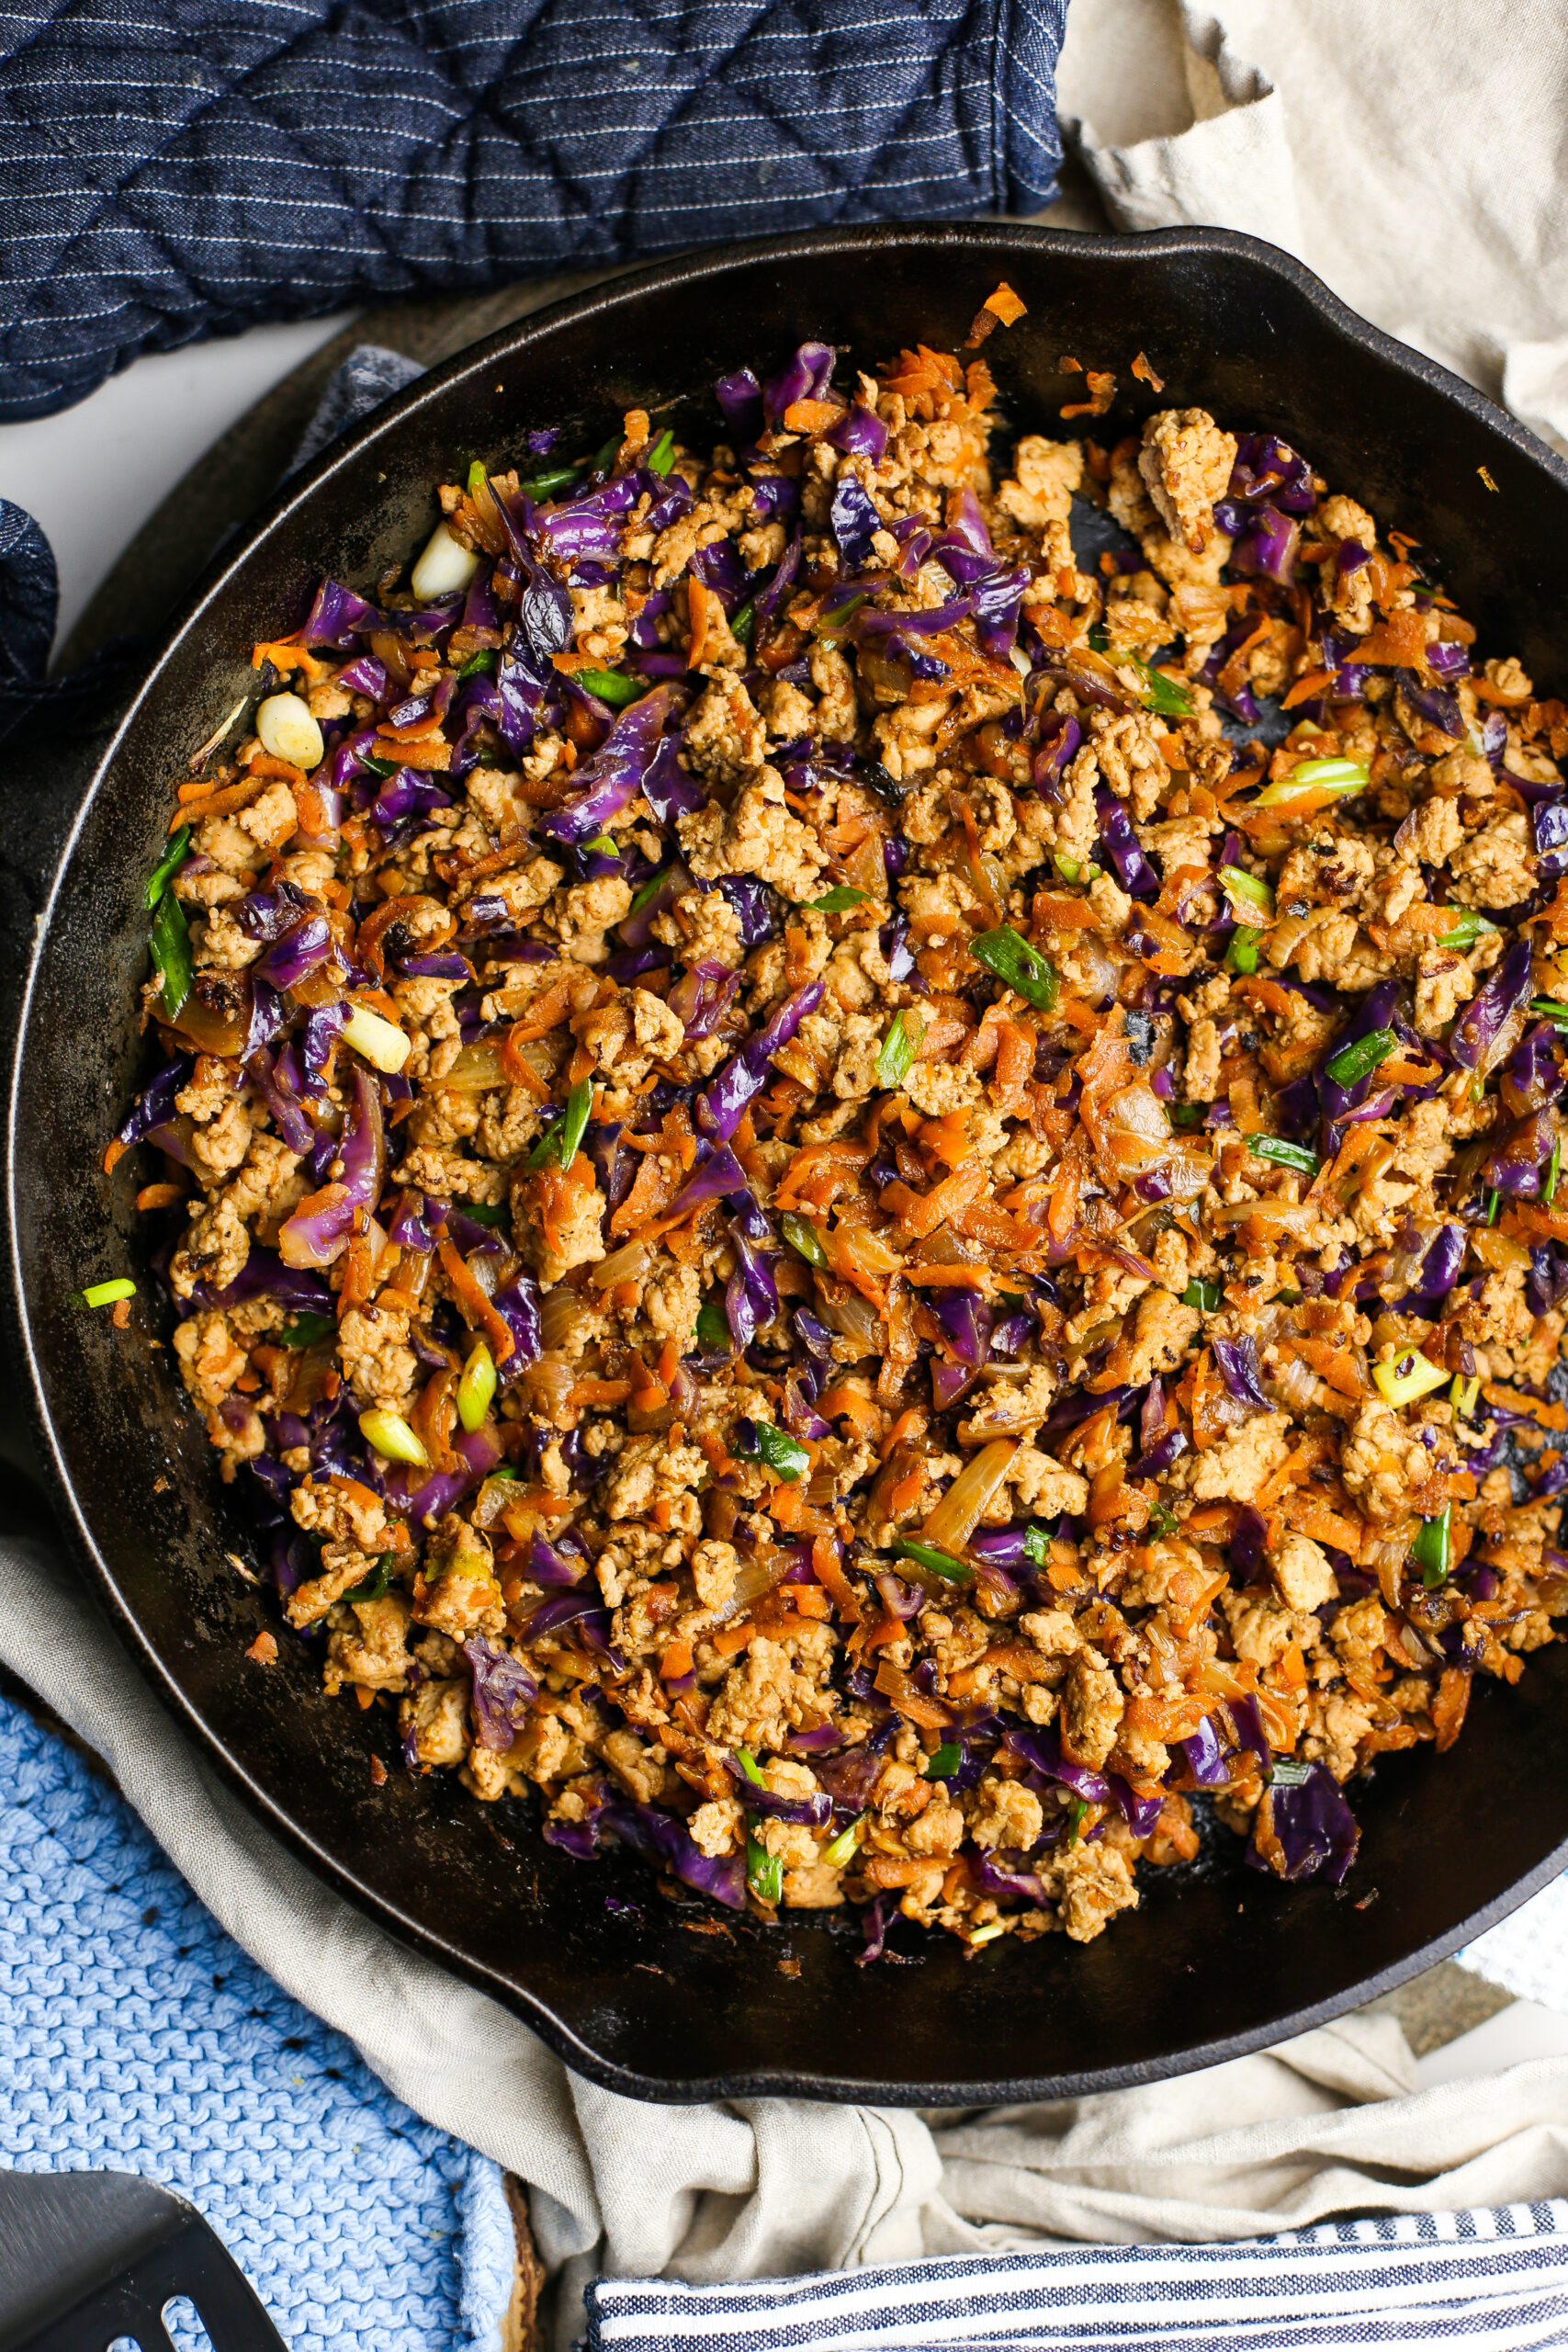 Overhead view of saucy ground chicken stir-fry with carrots, cabbage, and onions.